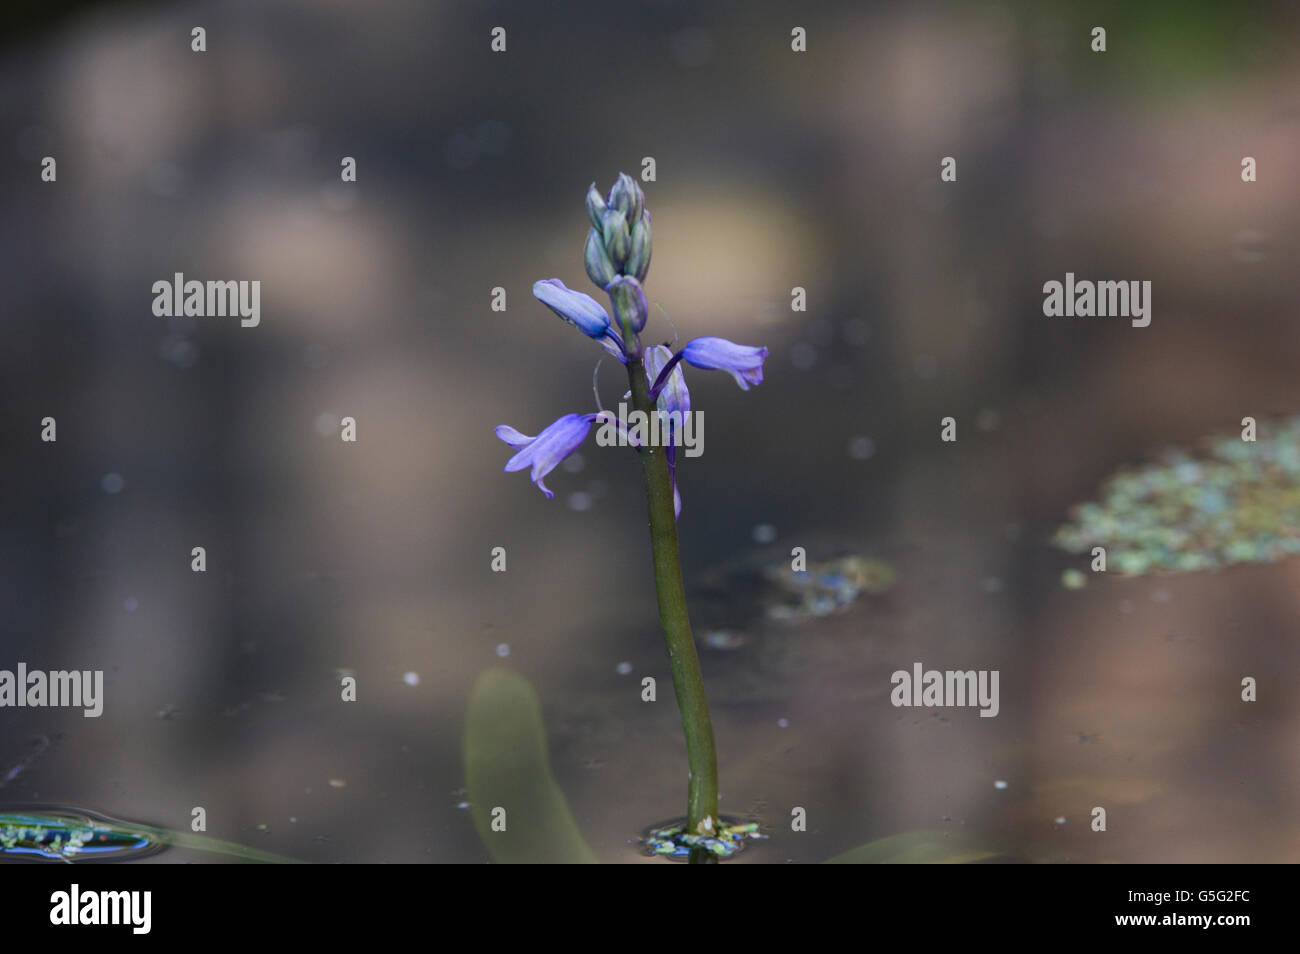 Bluebell reflected in the blurred, mirror-like water of a pond. Stock Photo